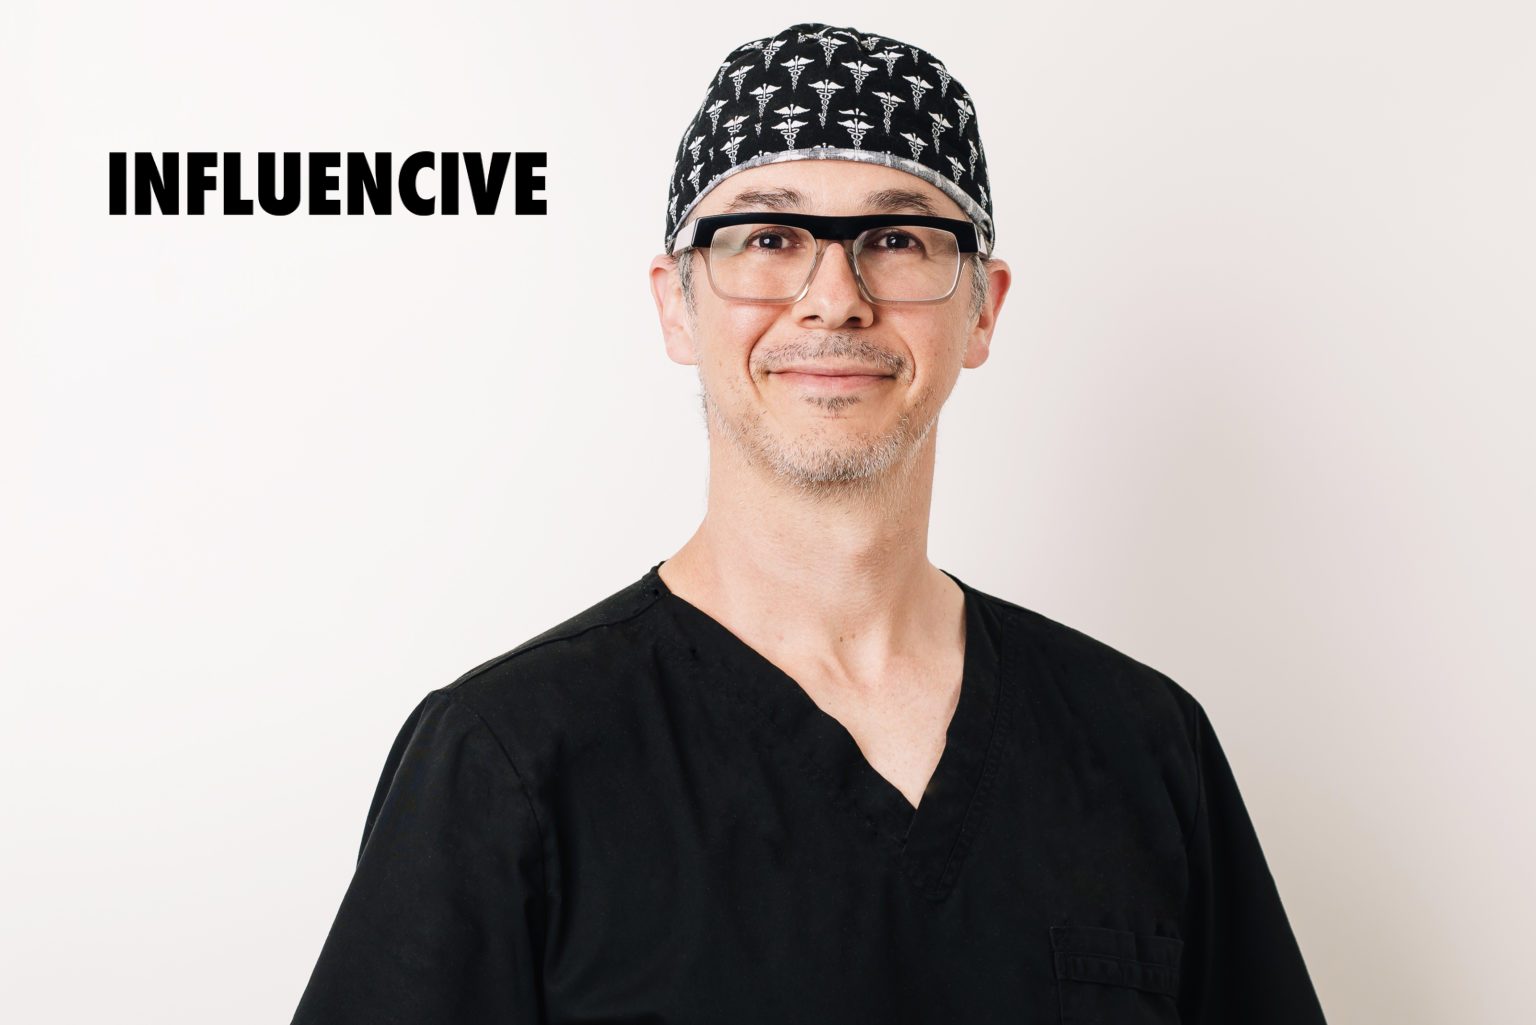 Why Renowned Plastic Surgeon Dr. Martin Jugenburg (A.k.a Dr. Six) Turned Down 350 People In 2019